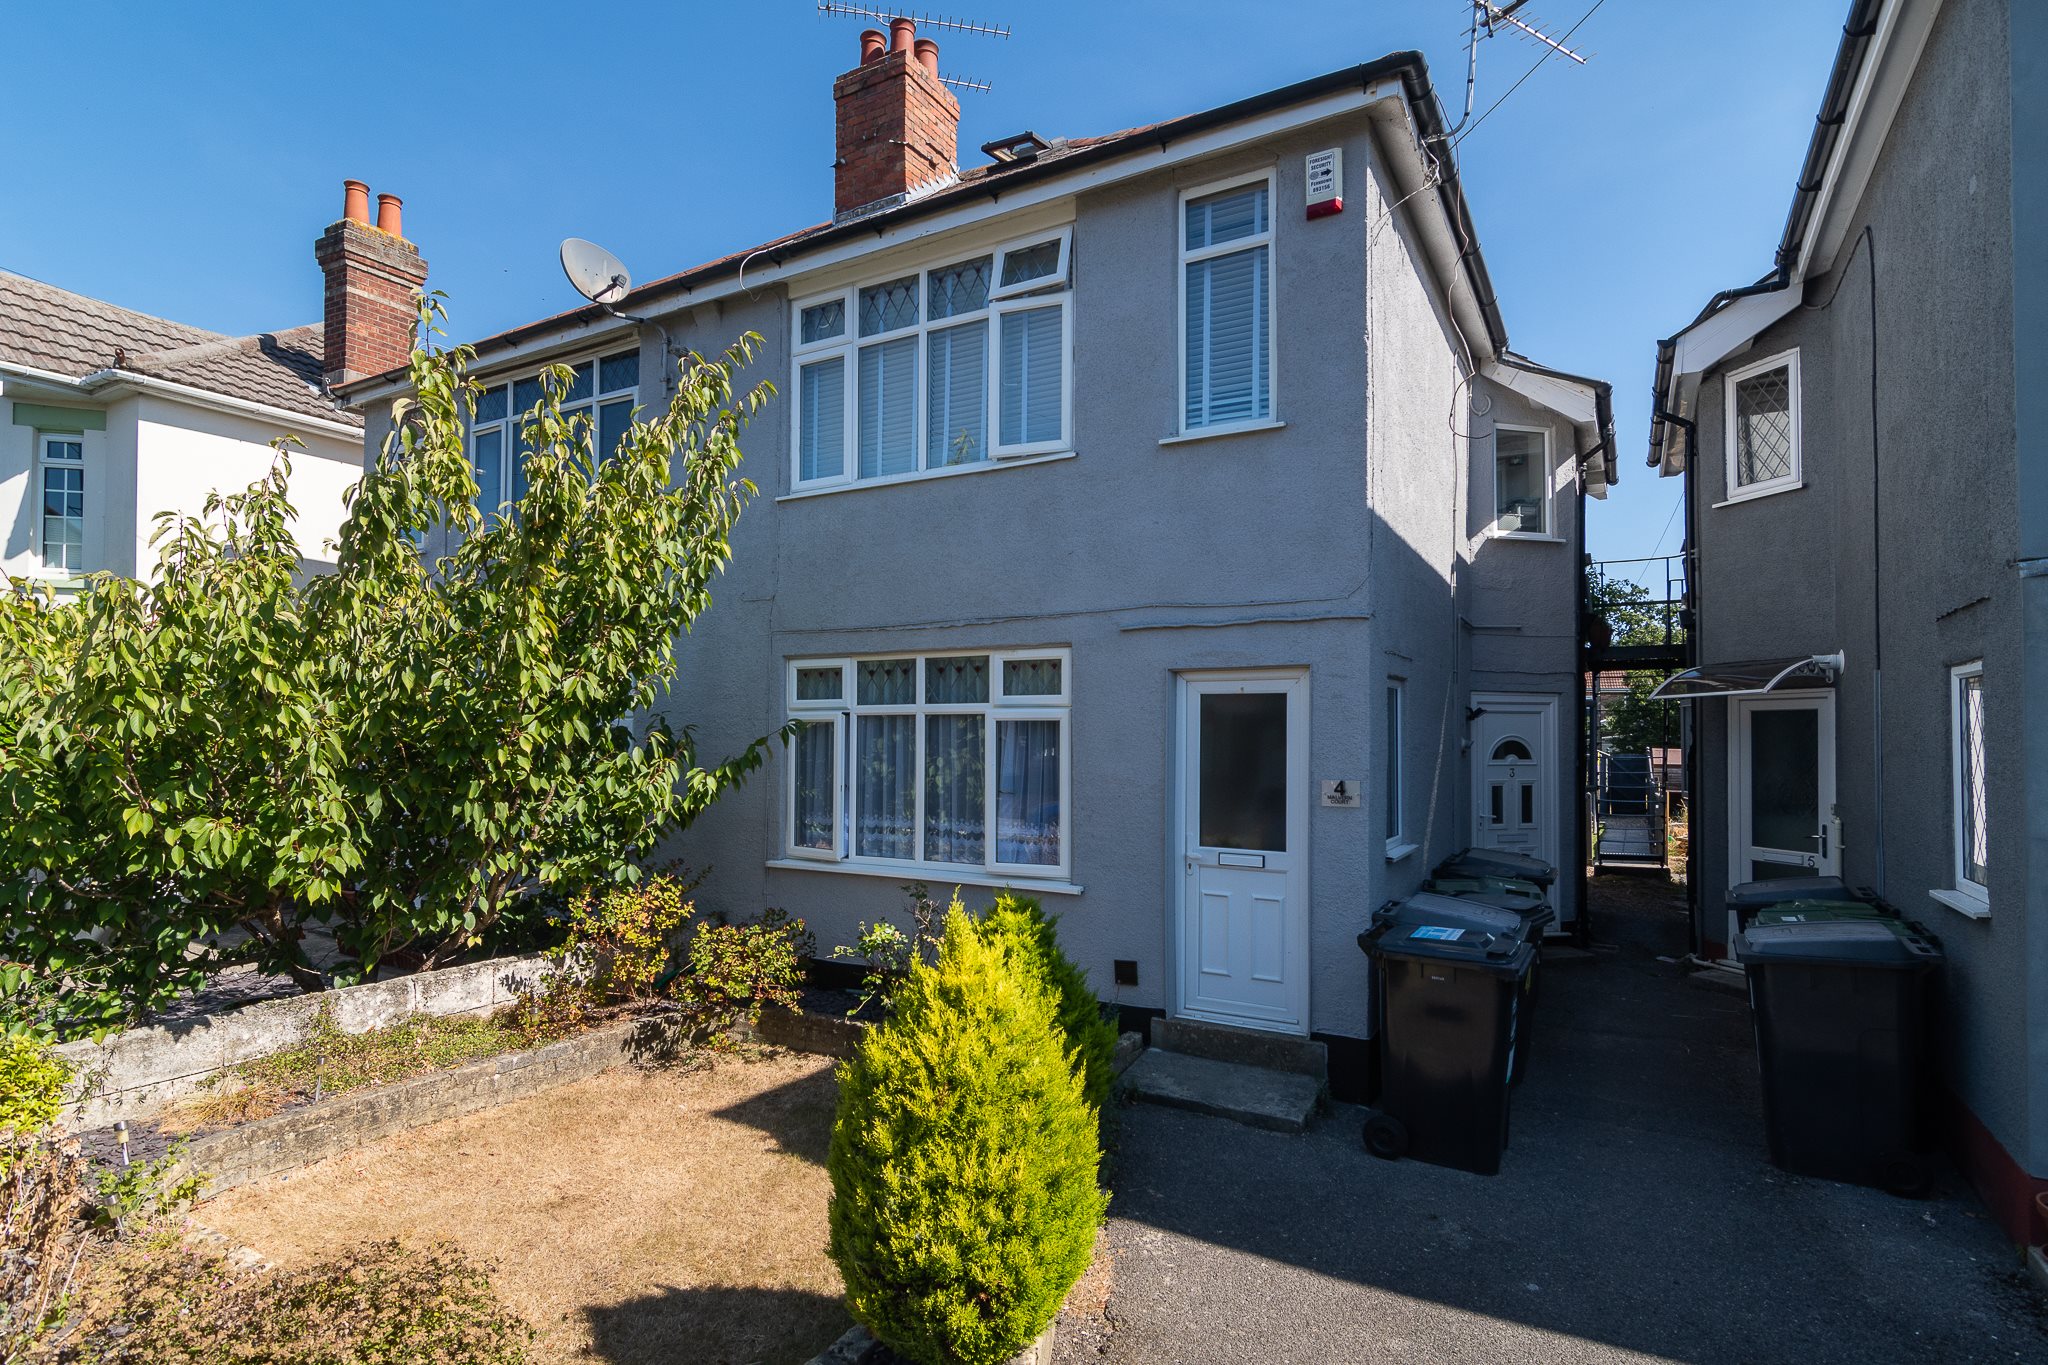 Christopher Shaw Residential is delighted to bring to market this charming 2 double bedroom first floor garden flat in the popular area of Moordown, with a Share of Freehold.